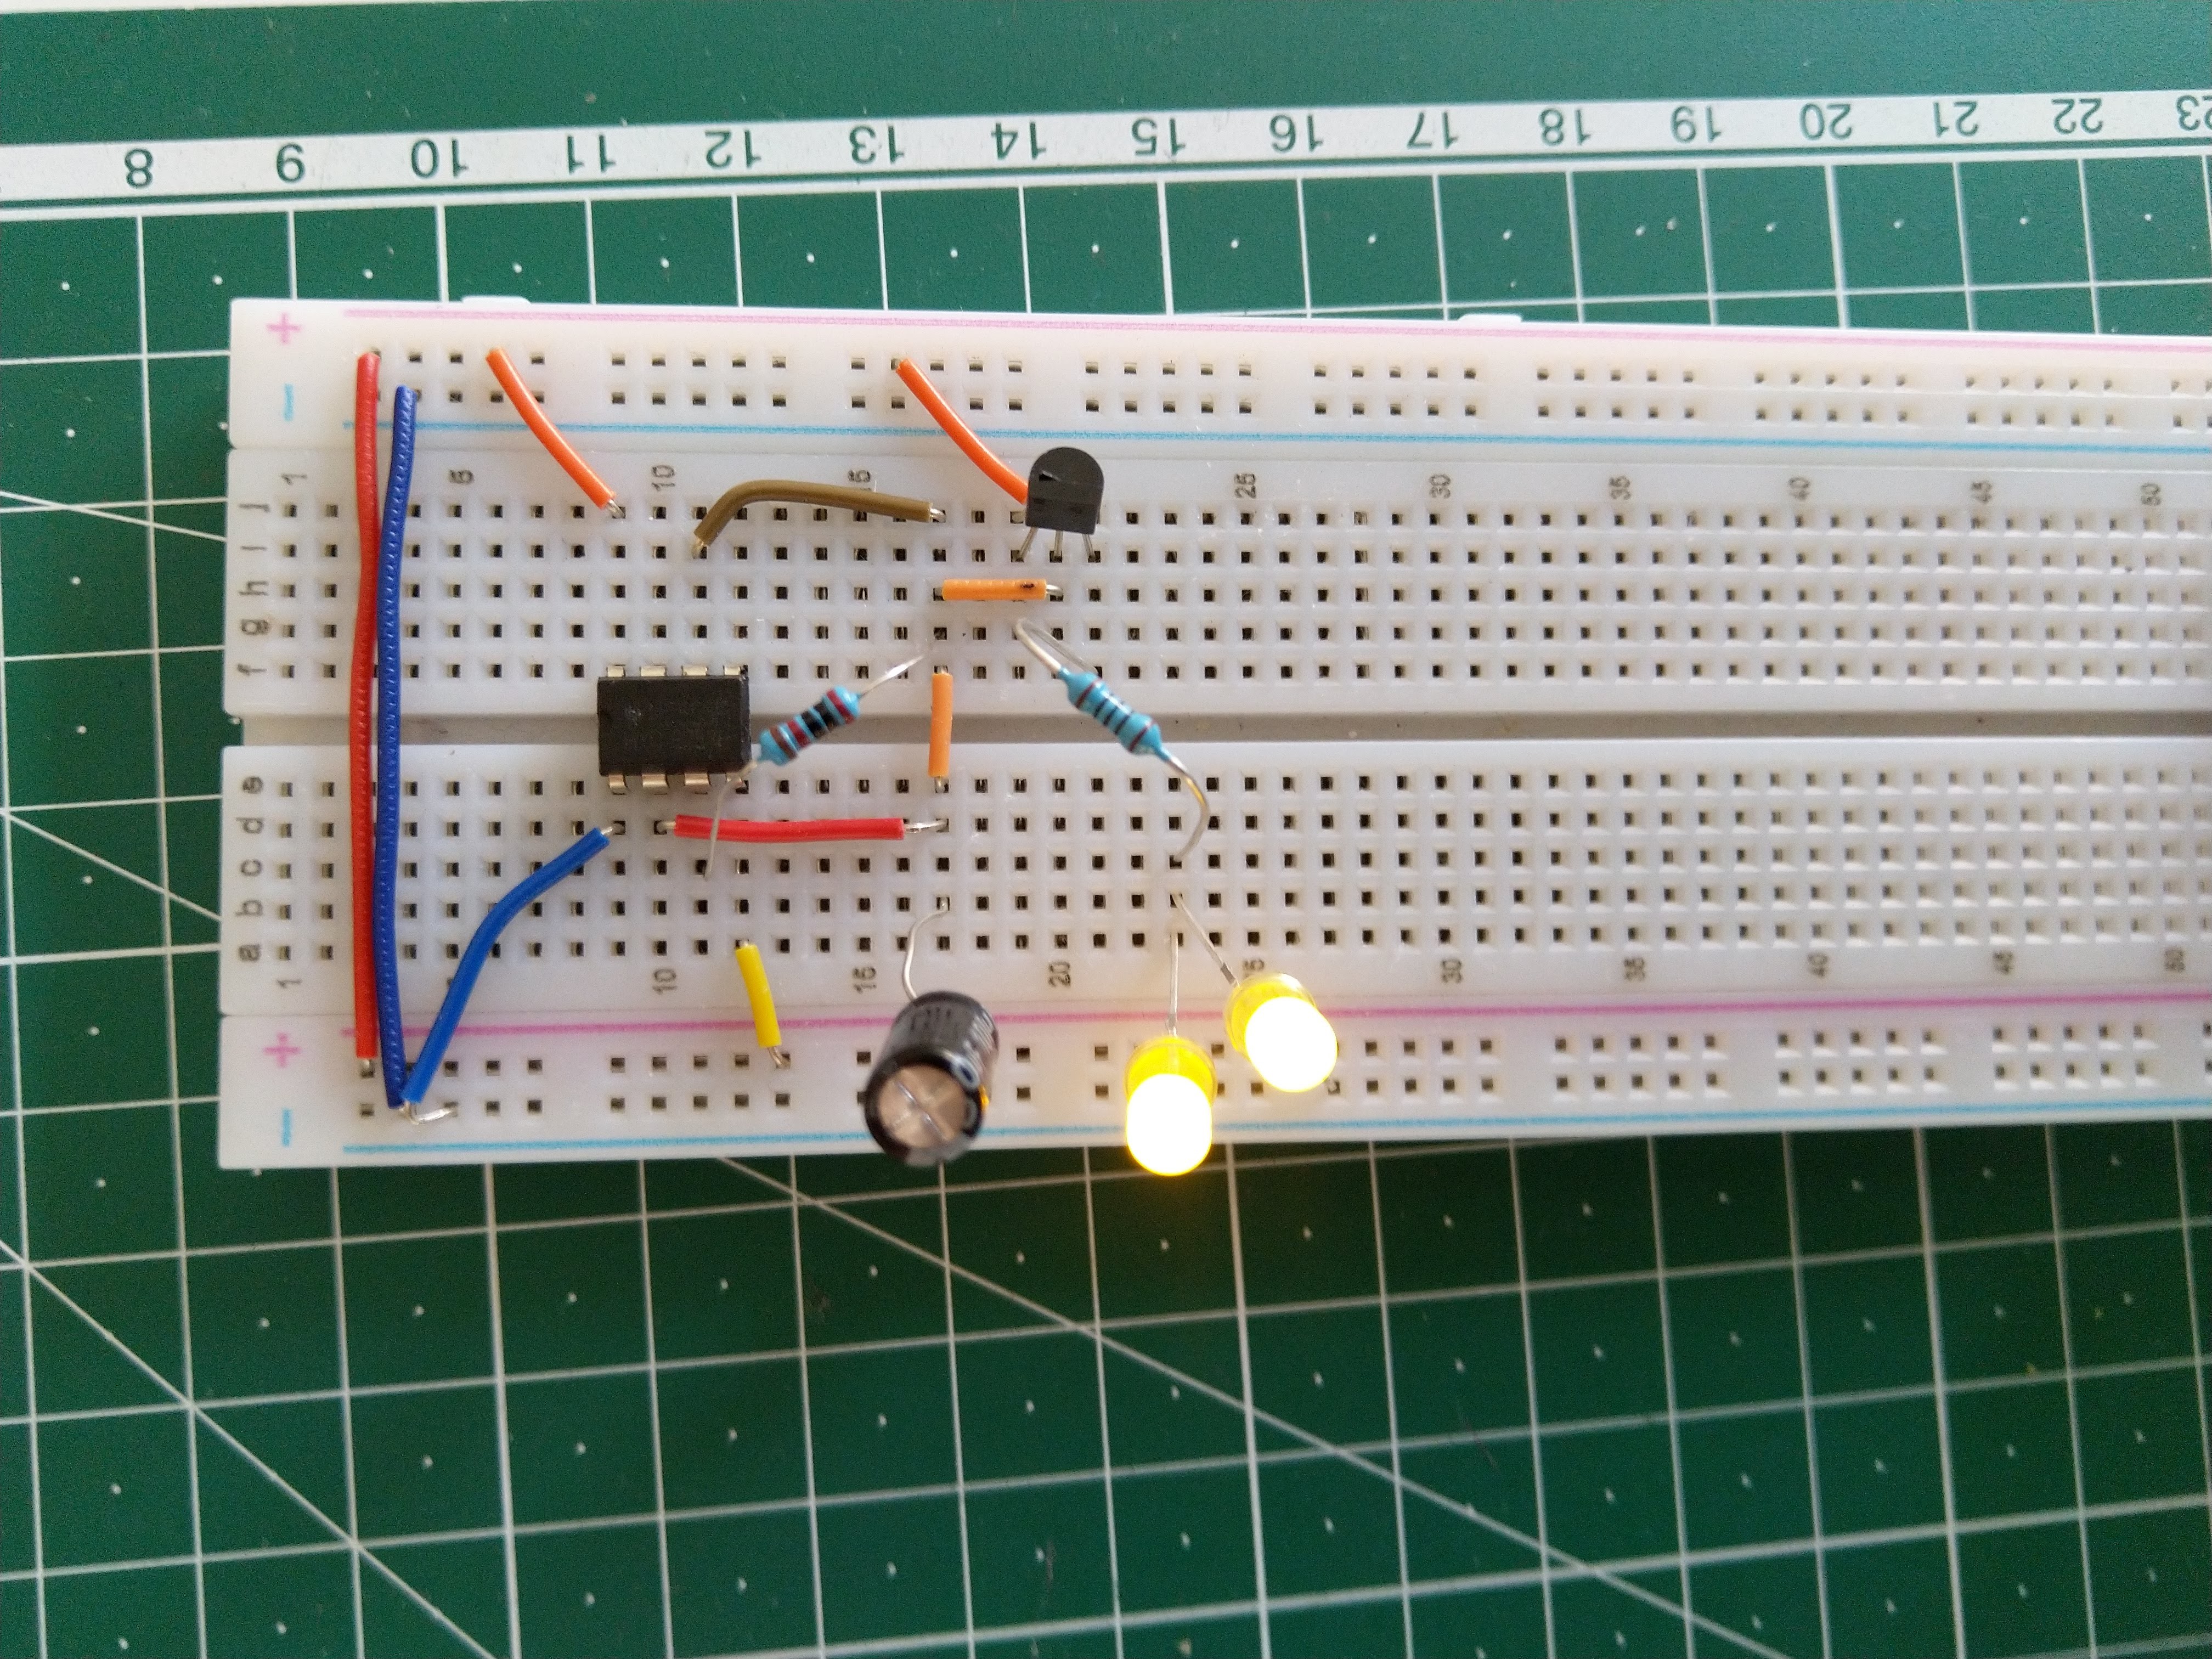 Breadboard prototype. I started with blue LEDs but they have a too high voltage drop and the effect wasn't that nice.